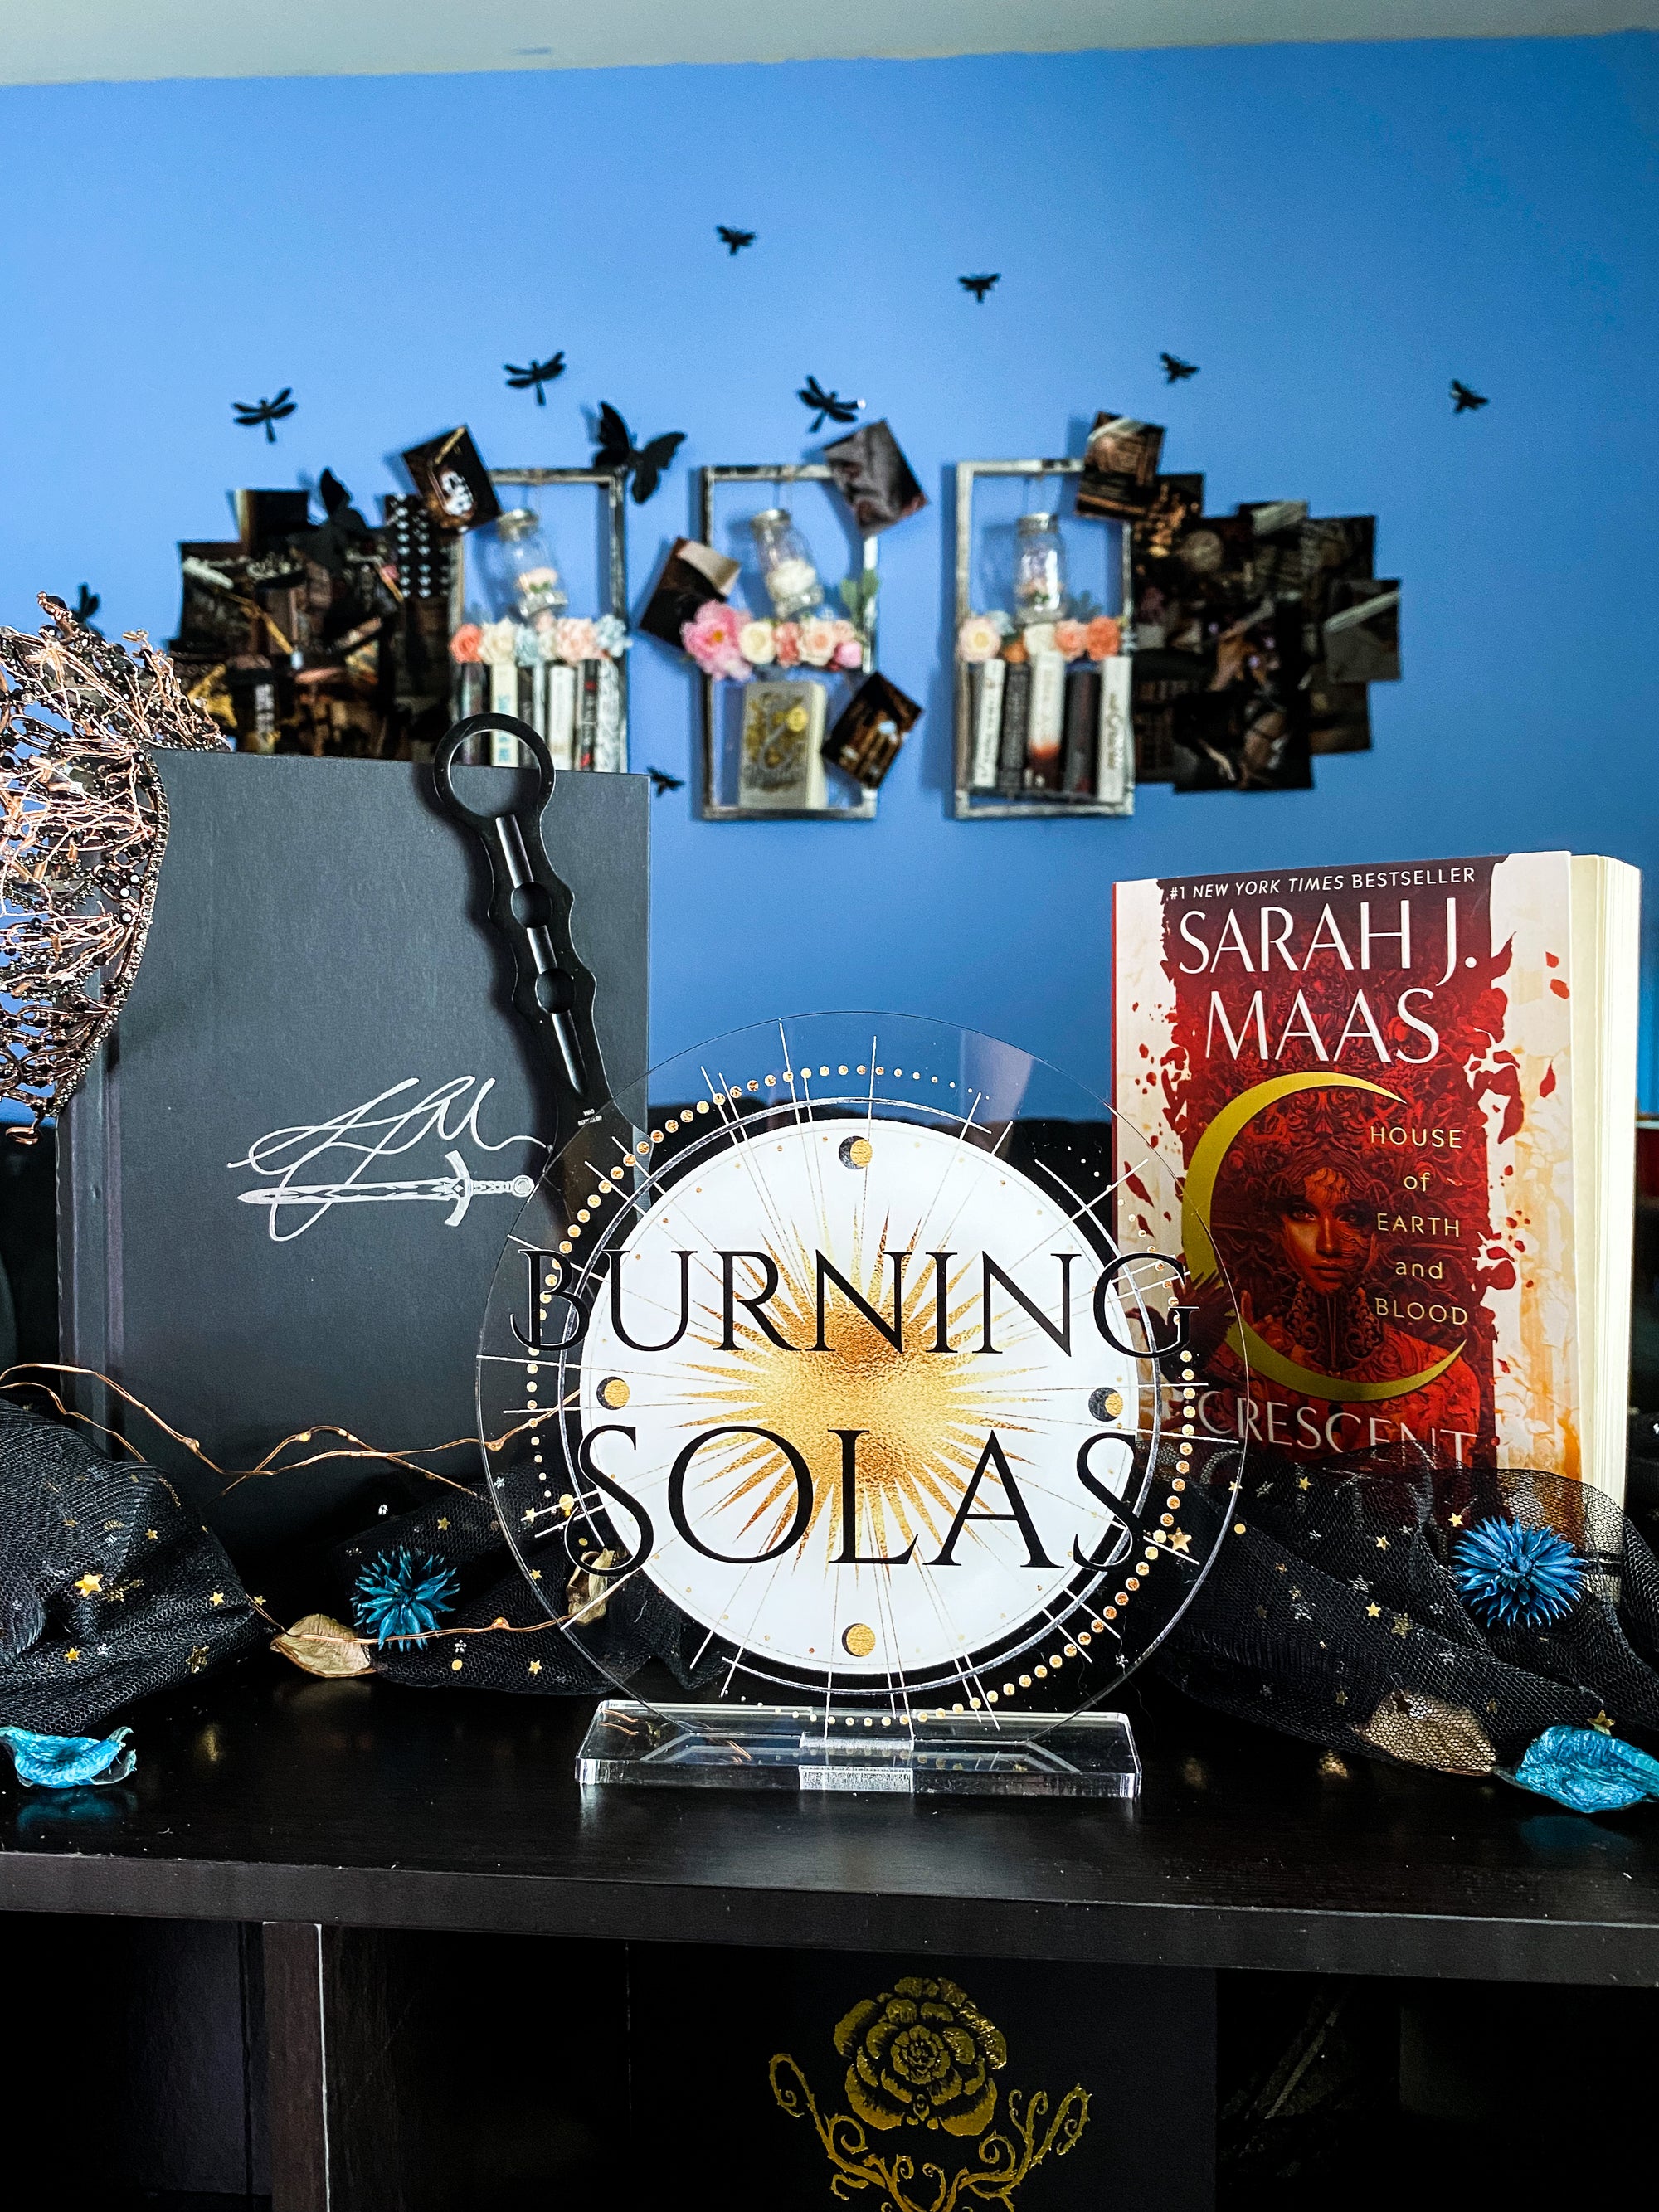 "Burning Solas" - Crescent City Series - Freestanding Bookshelf / Desktop Acrylic Accessory - Officially licensed by Sarah J. Maas - D34